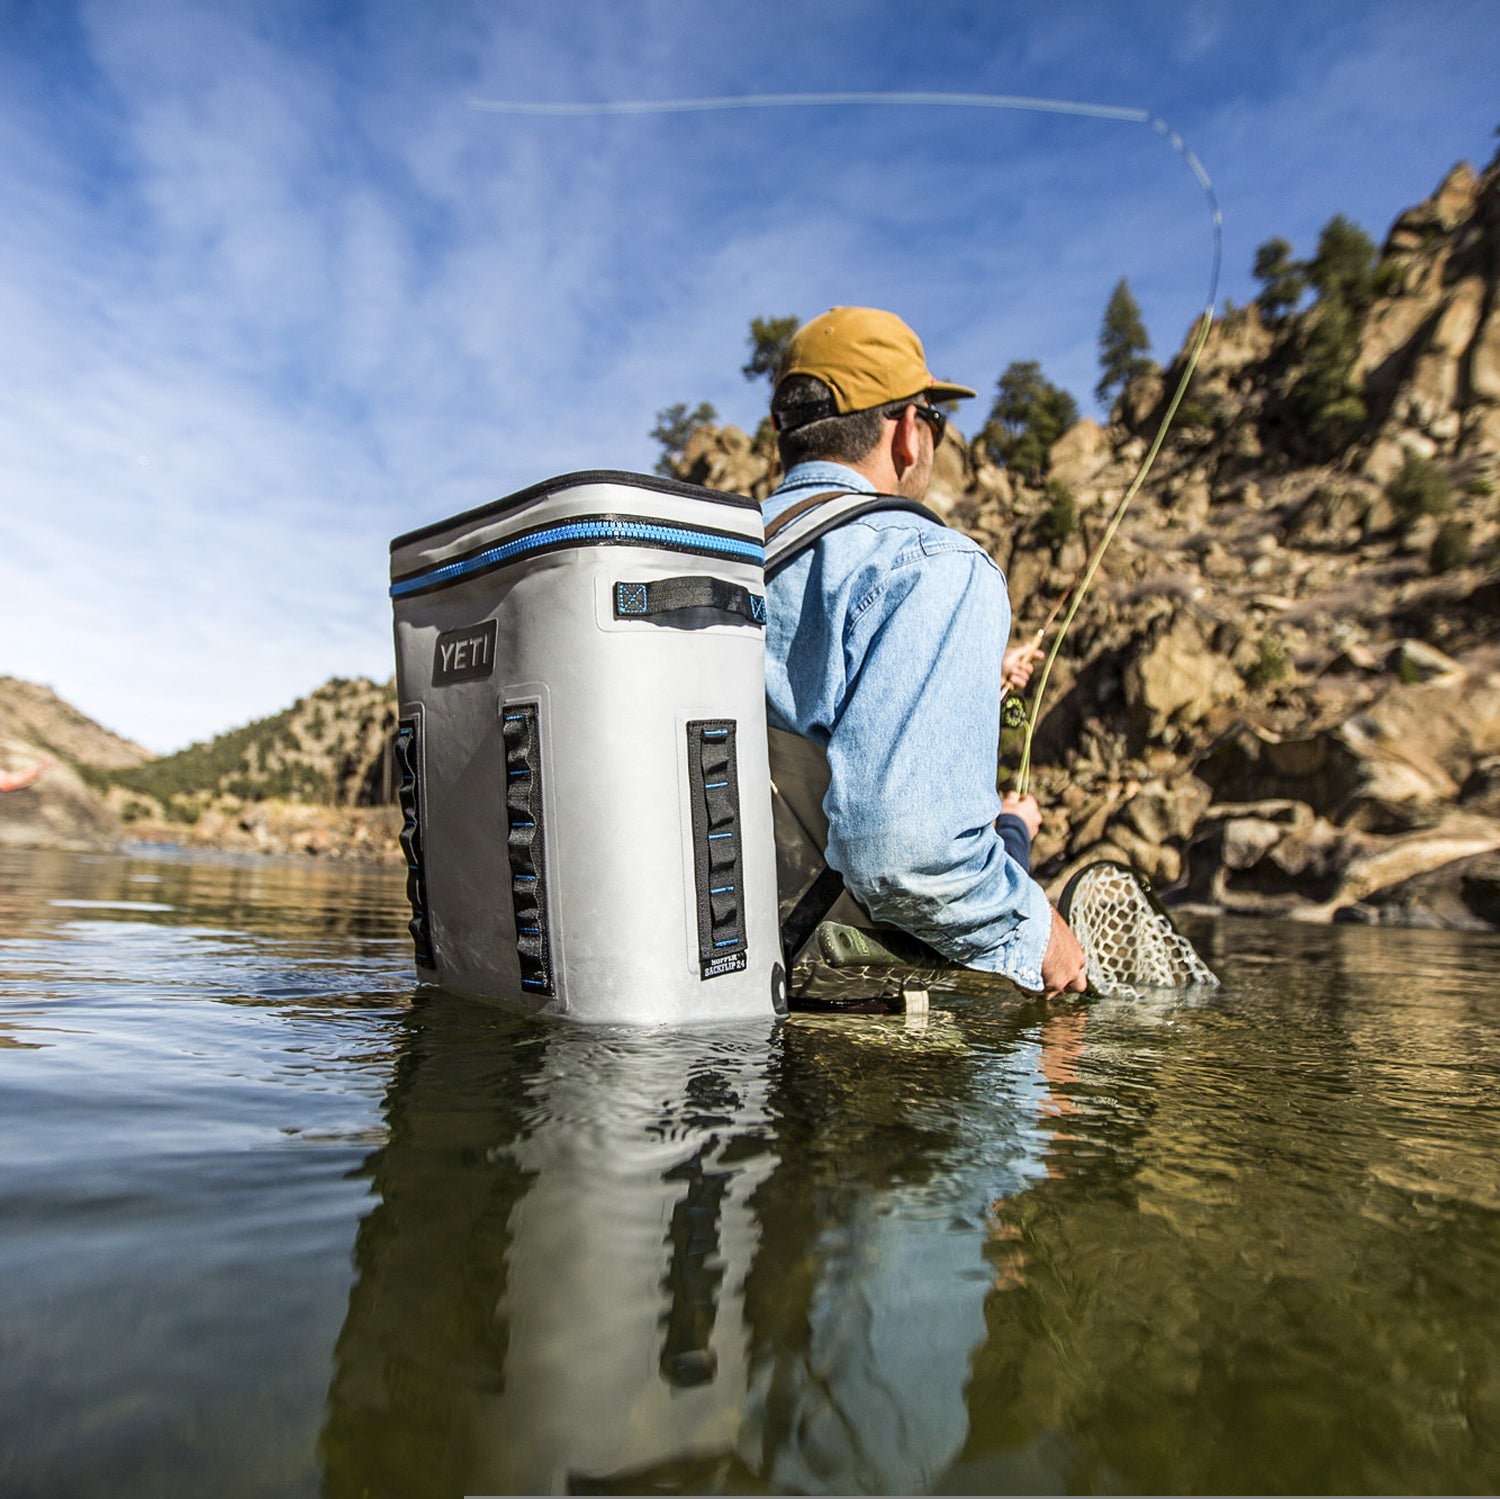 Yeti Coolers Withdraws Its IPO